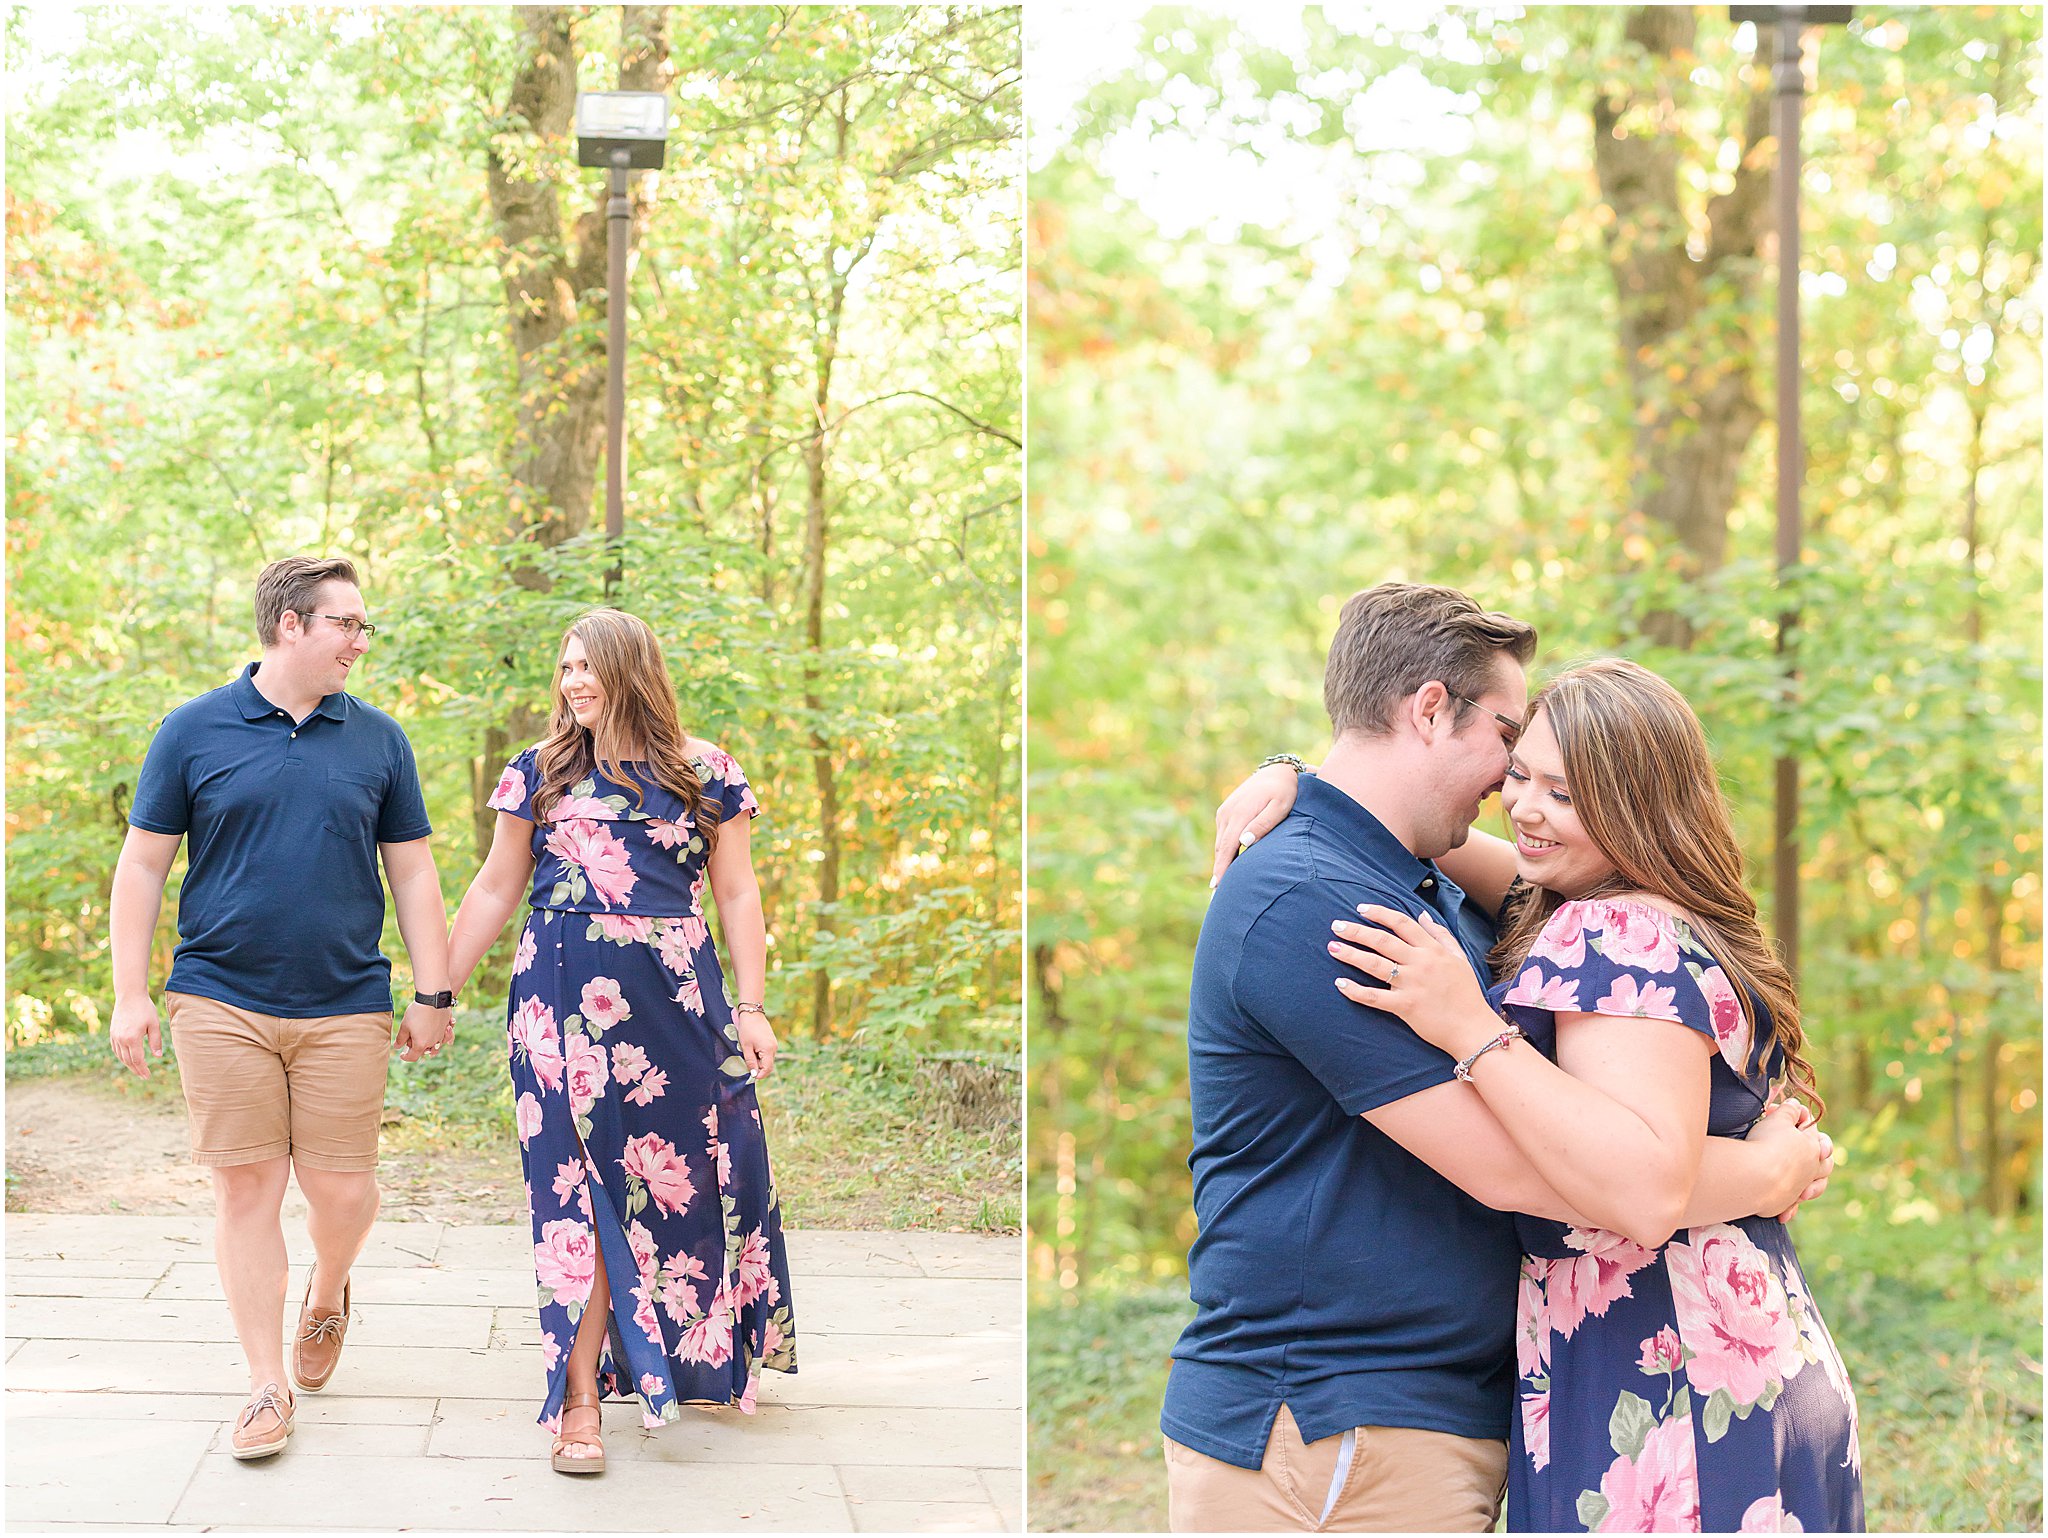 Couple walking and smiling at each other Holcomb Gardens family session